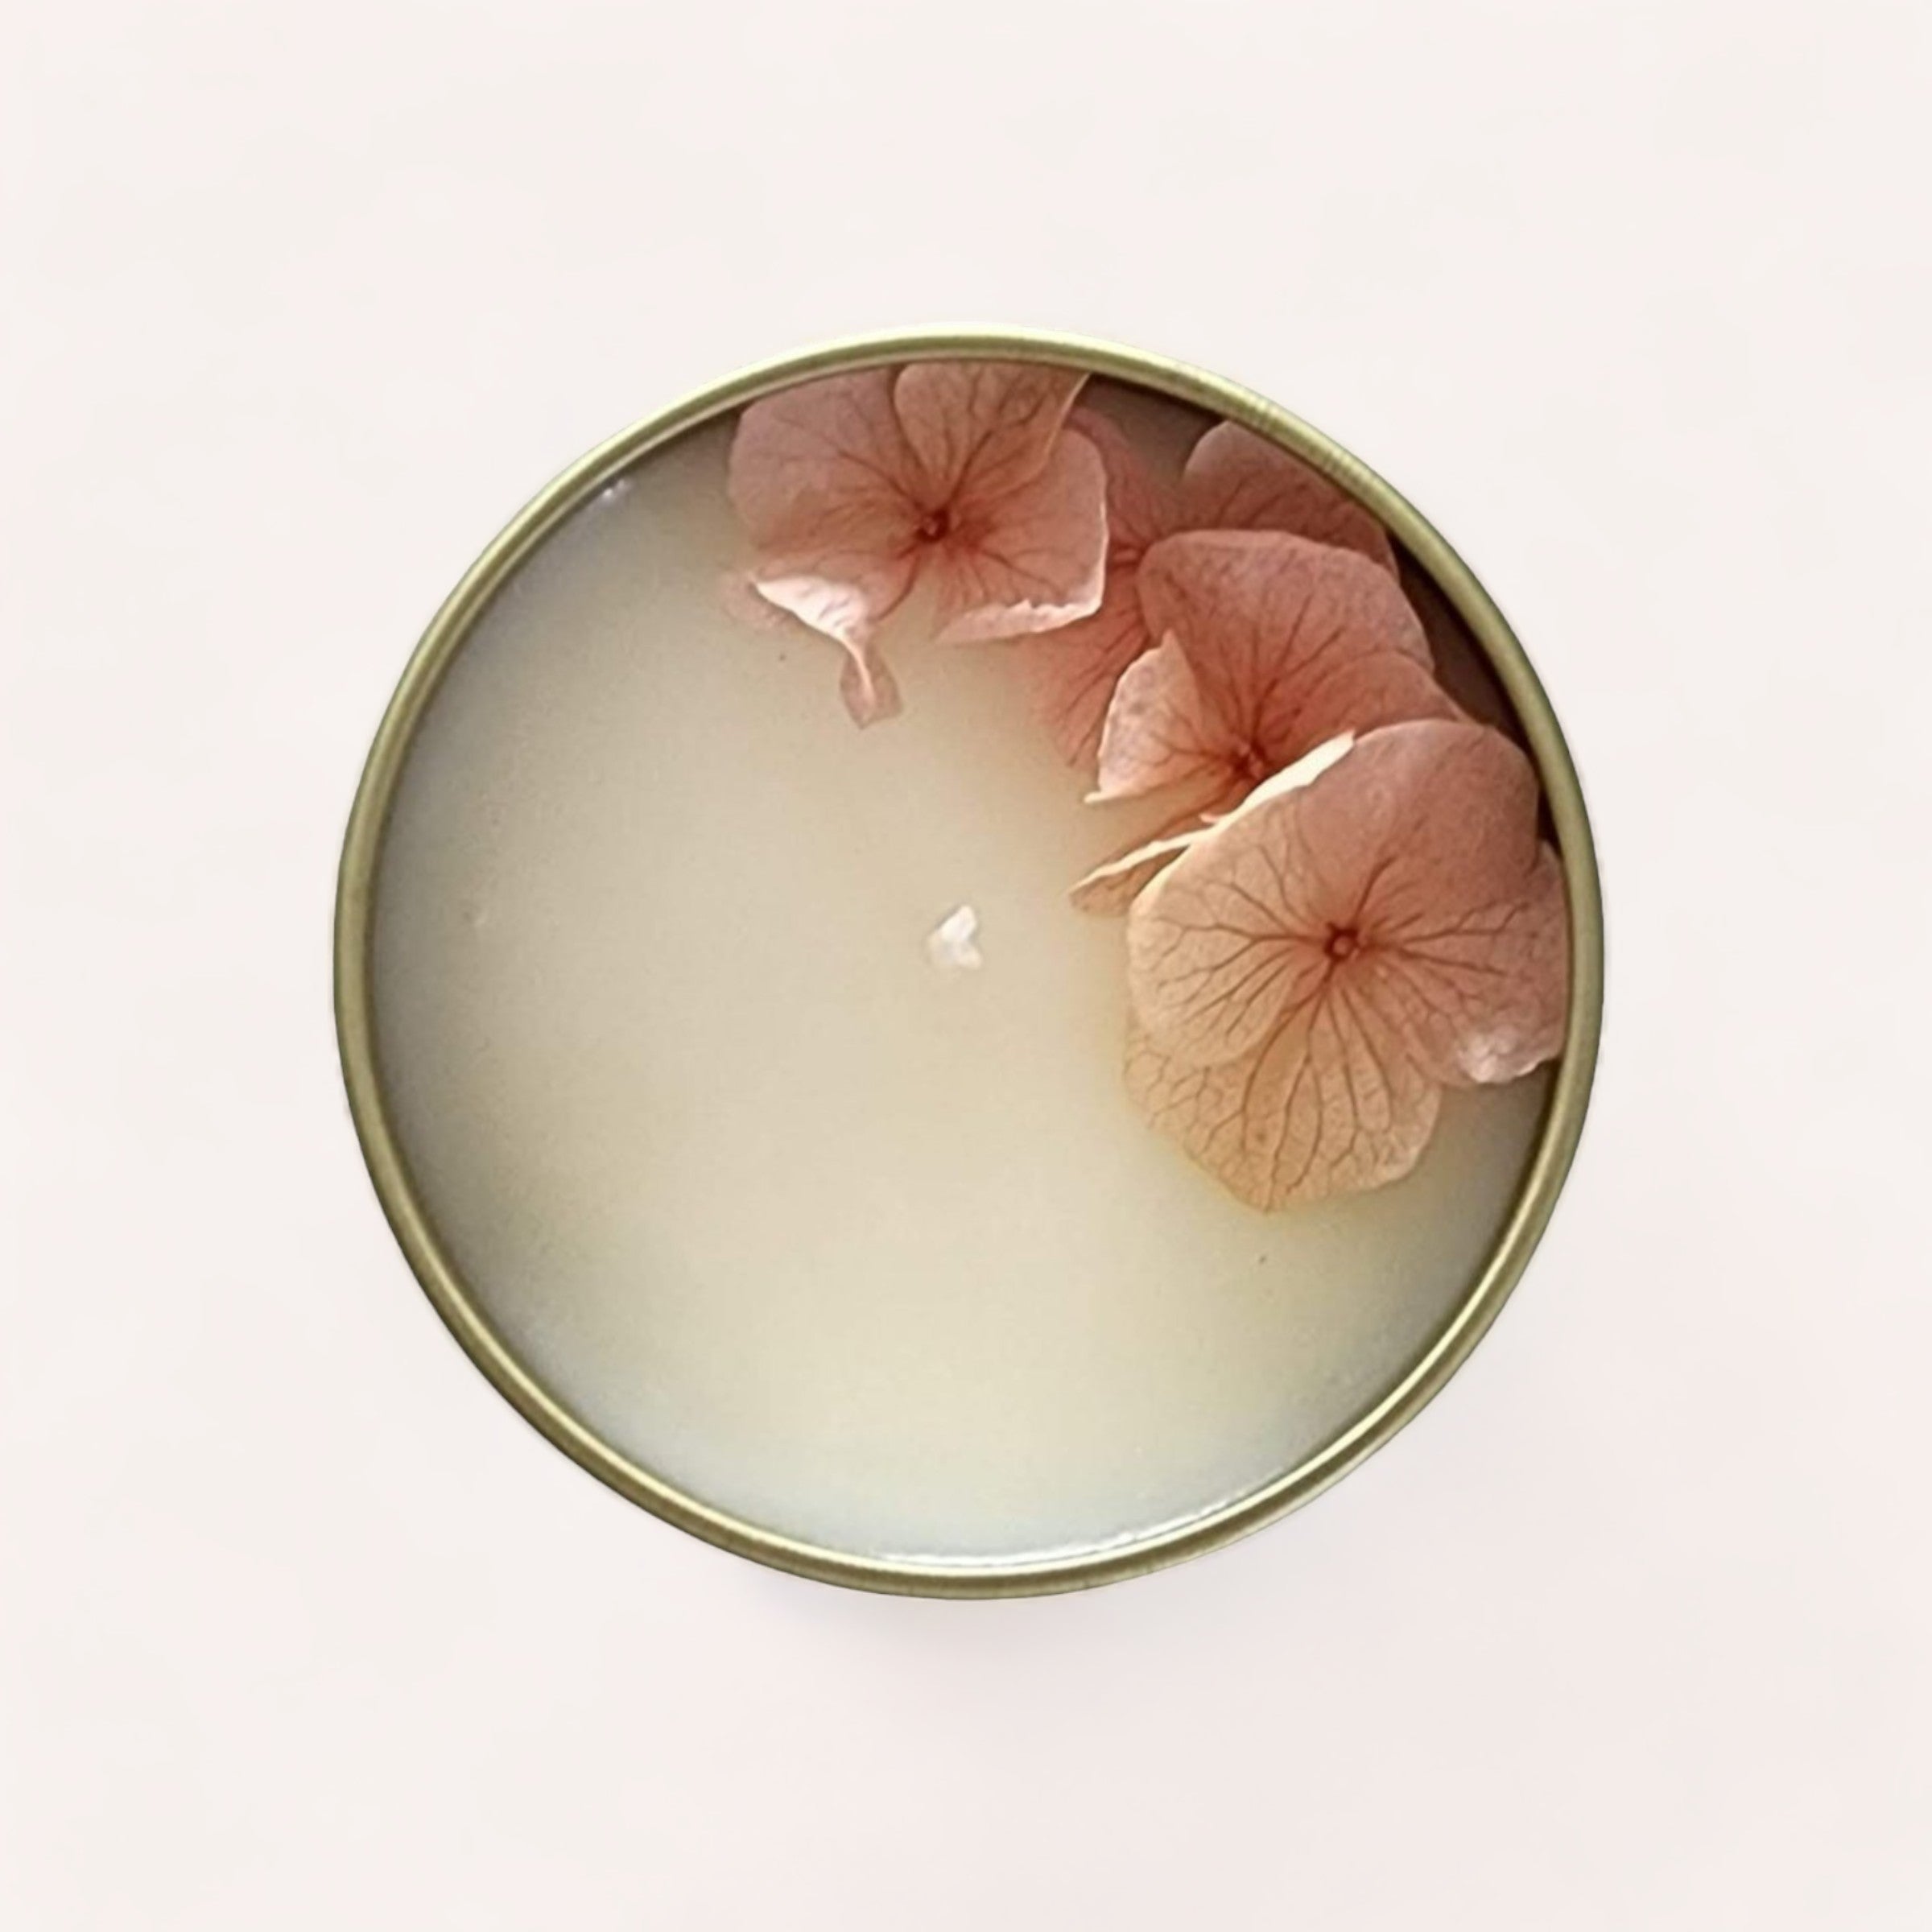 A serene Green Tea + Lemongrass Candle adorned with delicate pink petals against a soft white background, emitting a subtle green tea fragrance by Wix's Lane Co.